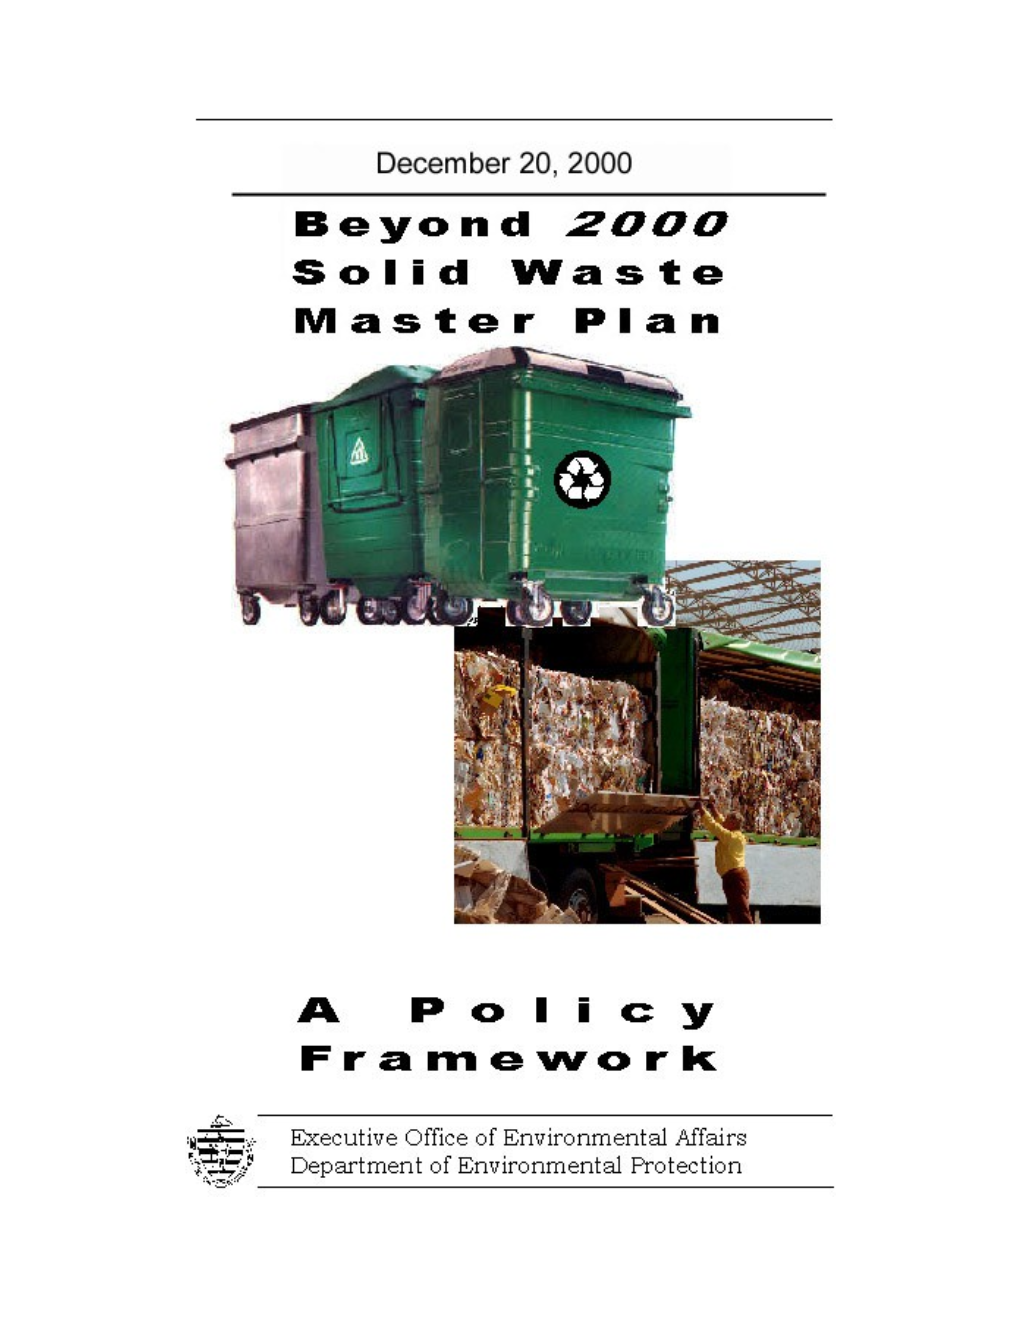 I Am Pleased to Present the Final Beyond 2000 Solid Waste Master Plan a Policy Framework